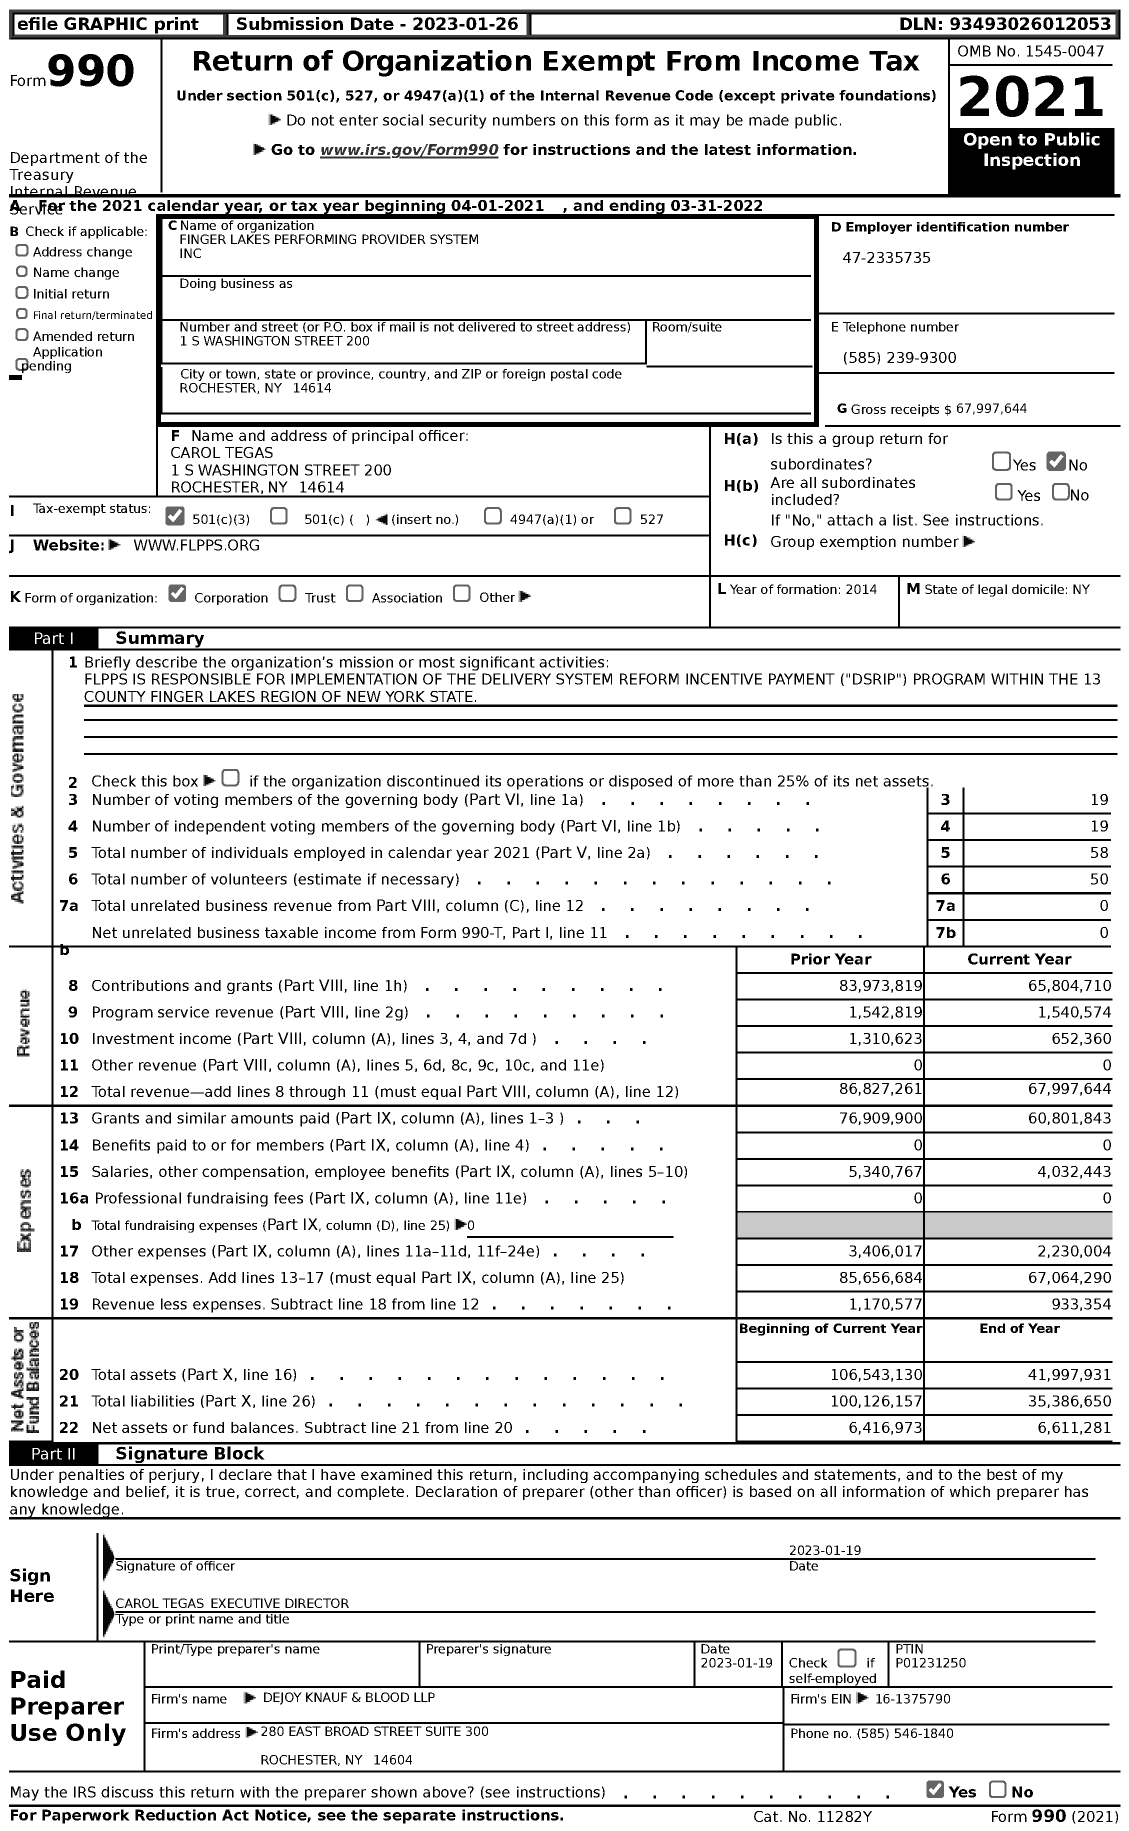 Image of first page of 2021 Form 990 for Finger Lakes Performing Provider System (FLPPS)